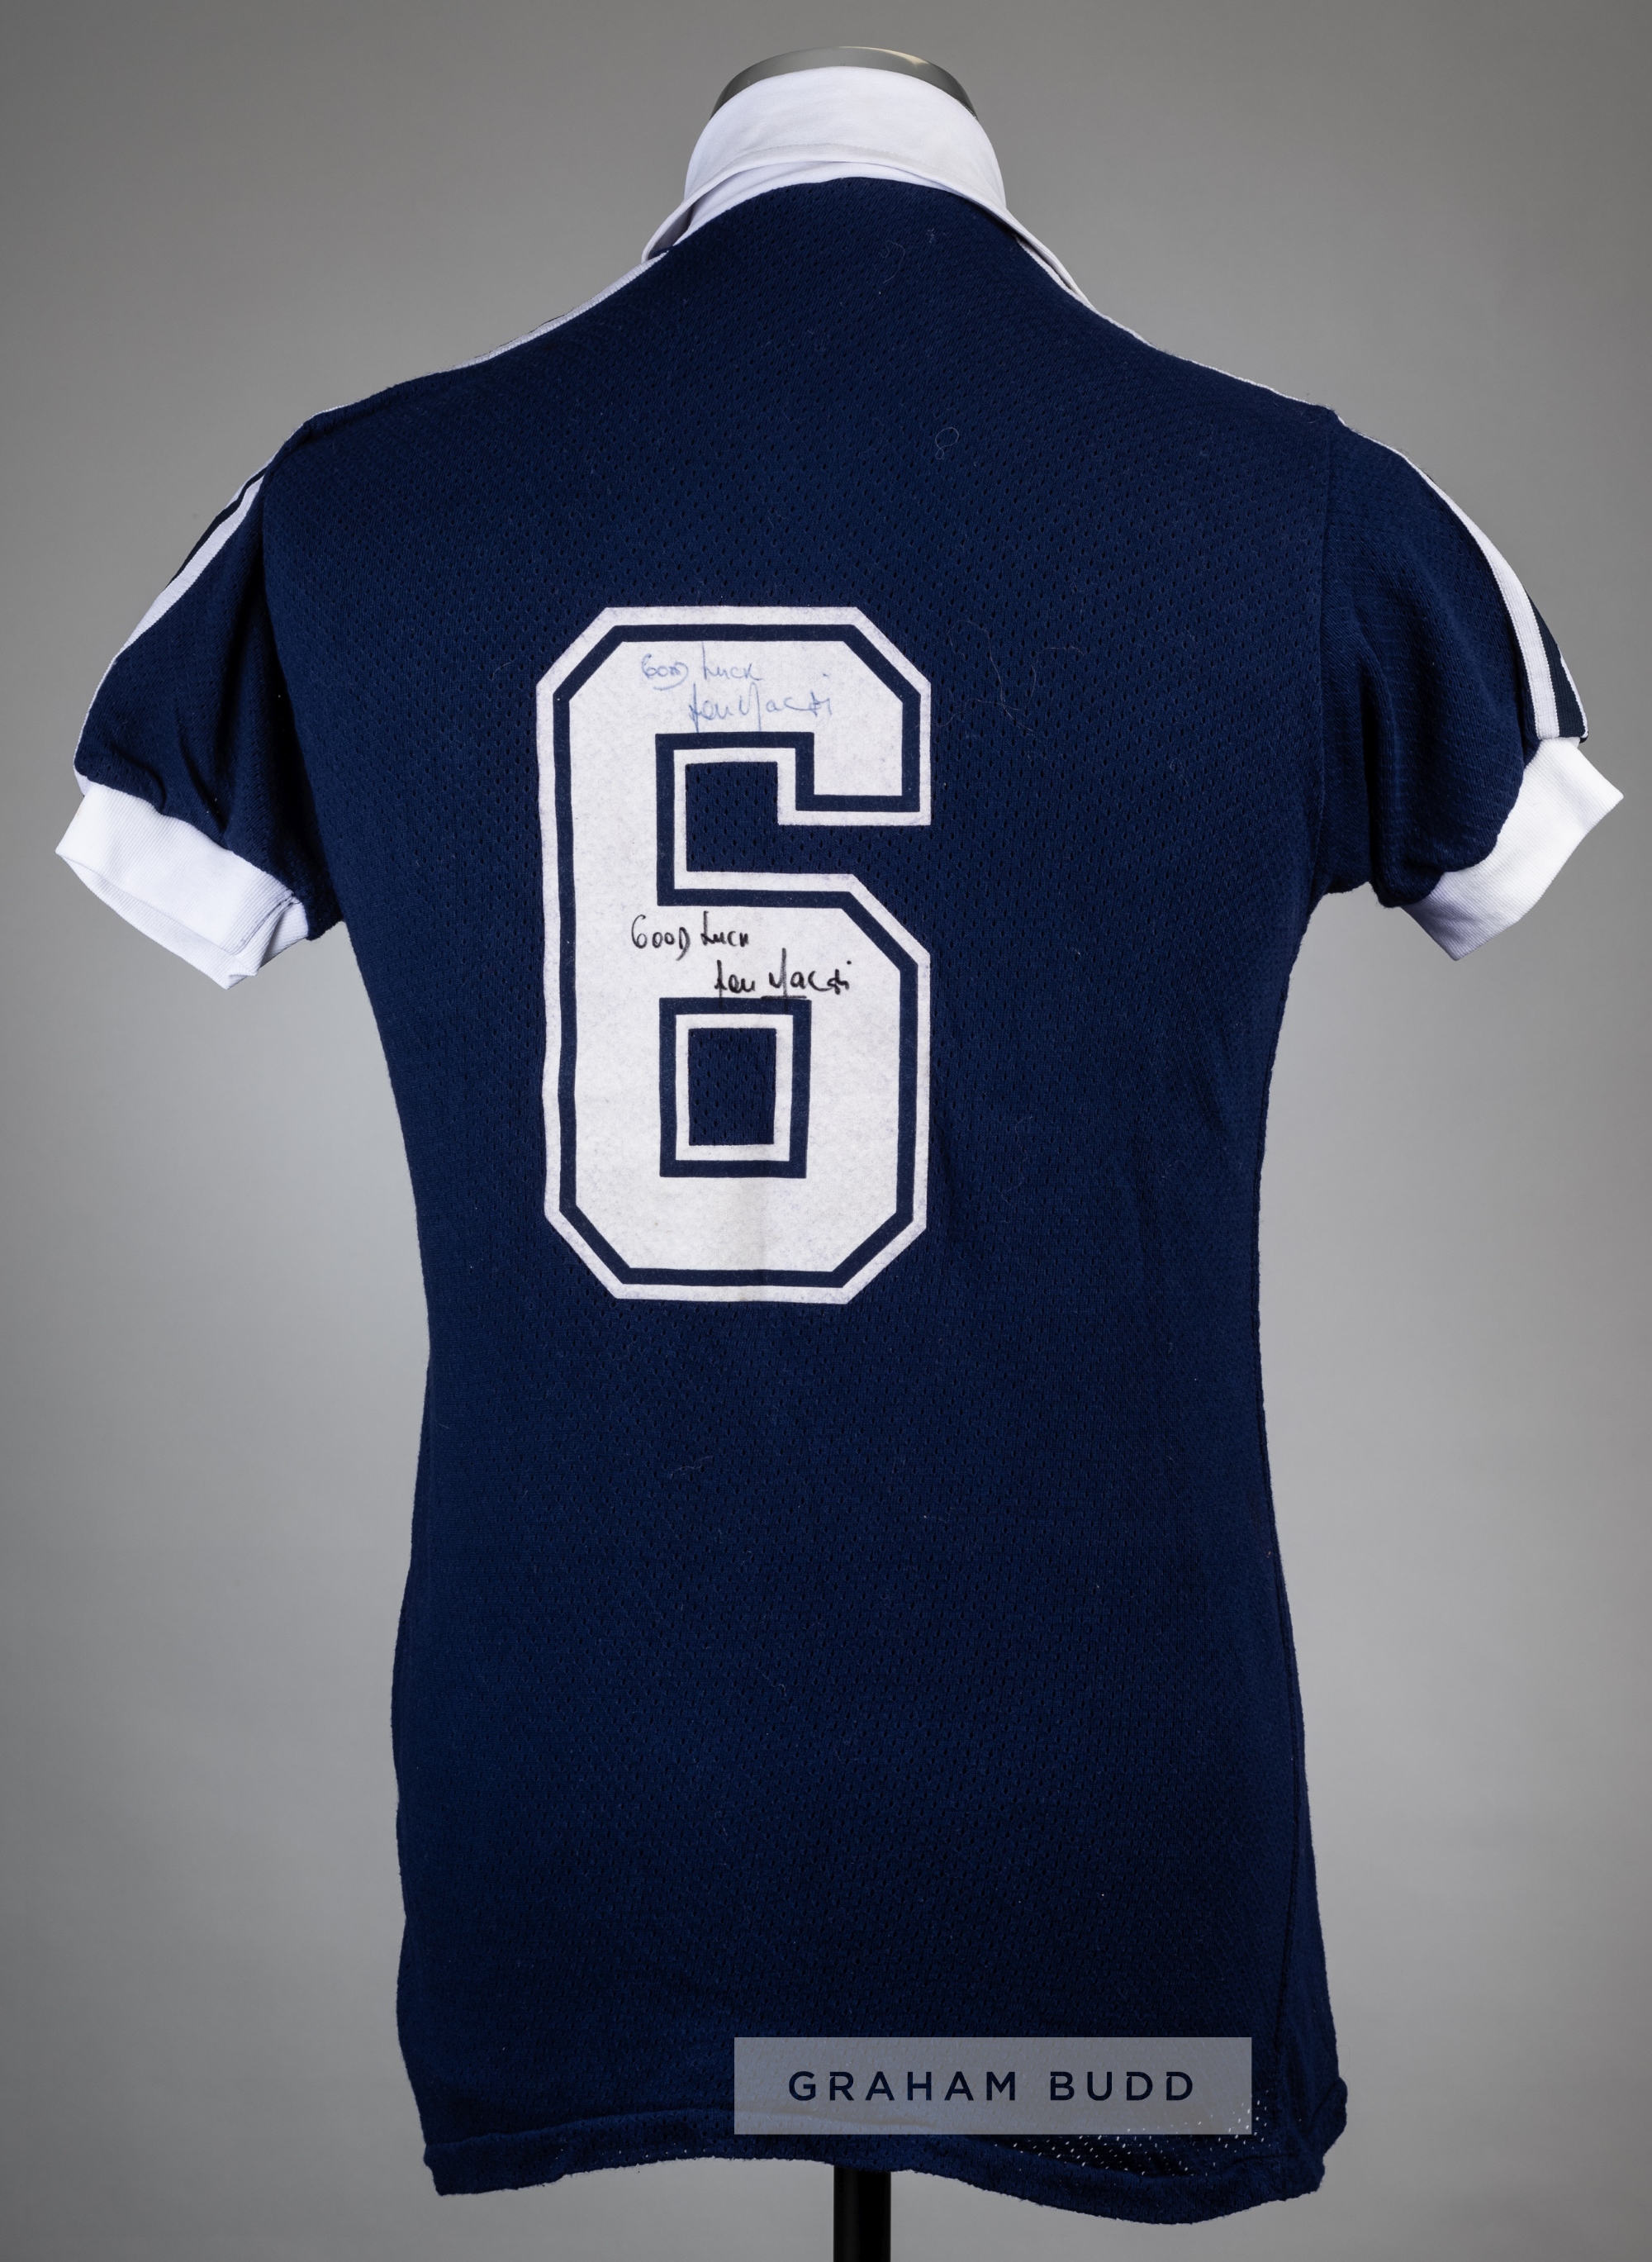 Lou Macari signed blue Scotland No.6 jersey, circa 1970s, Umbro, short-sleeved with embroidered - Image 2 of 2